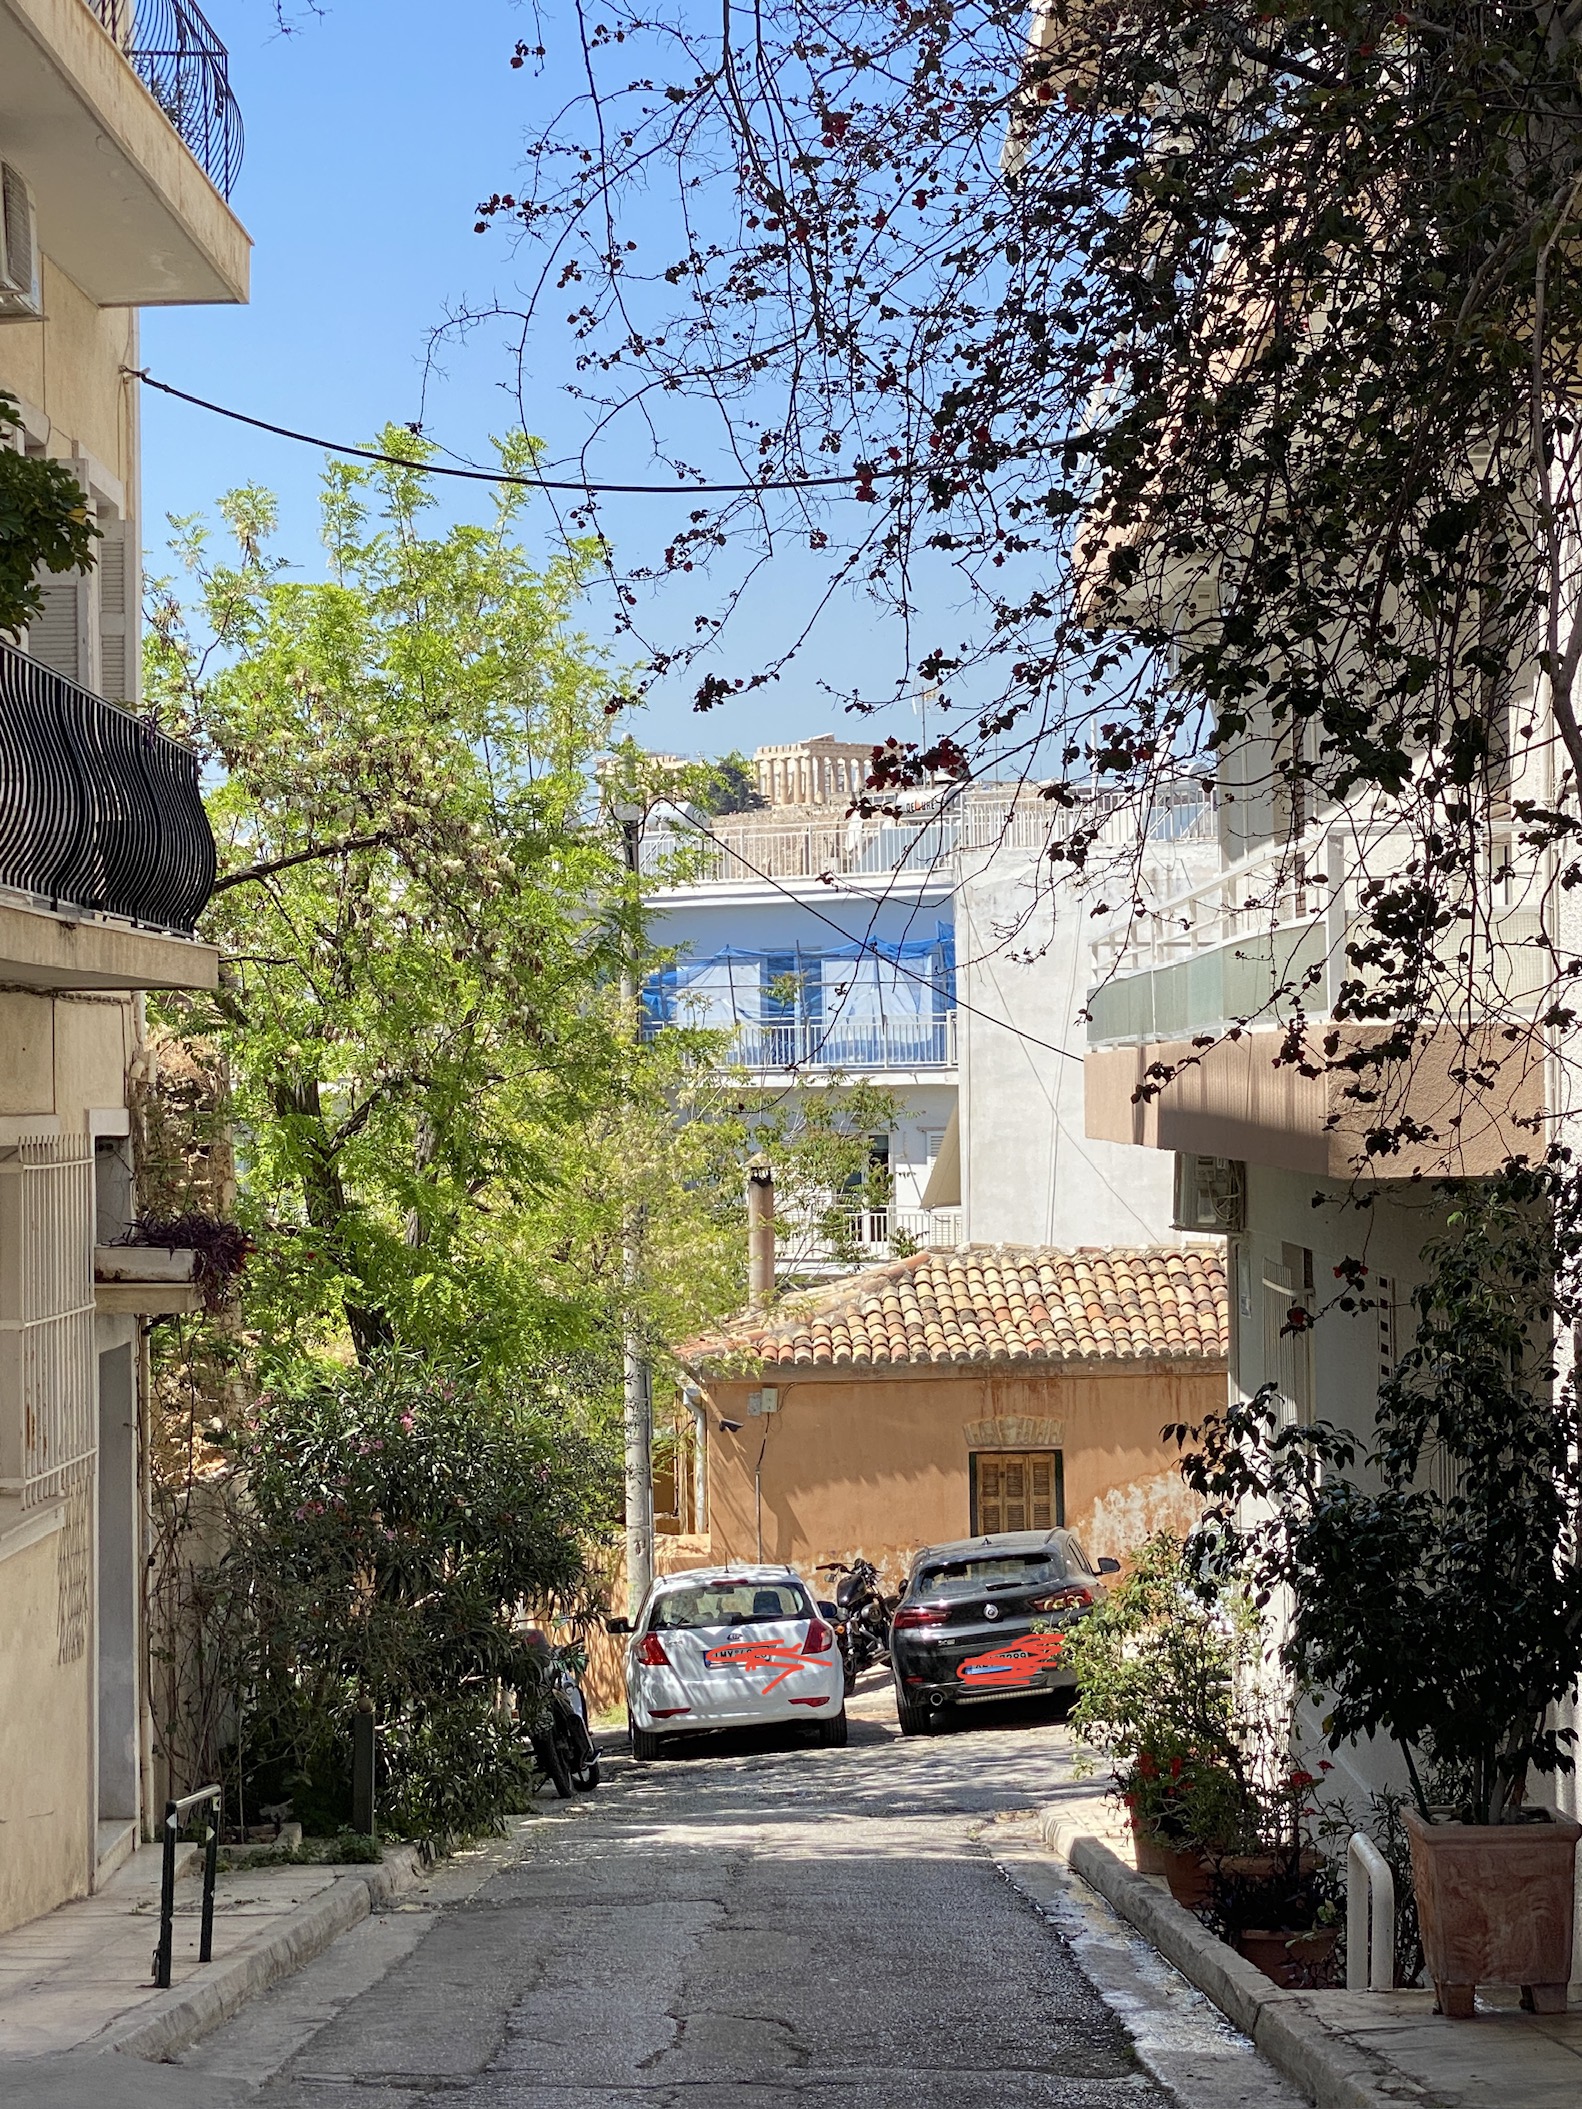 House at the junction of Sorvolou and Koutoula streets, the Acropolis in the background